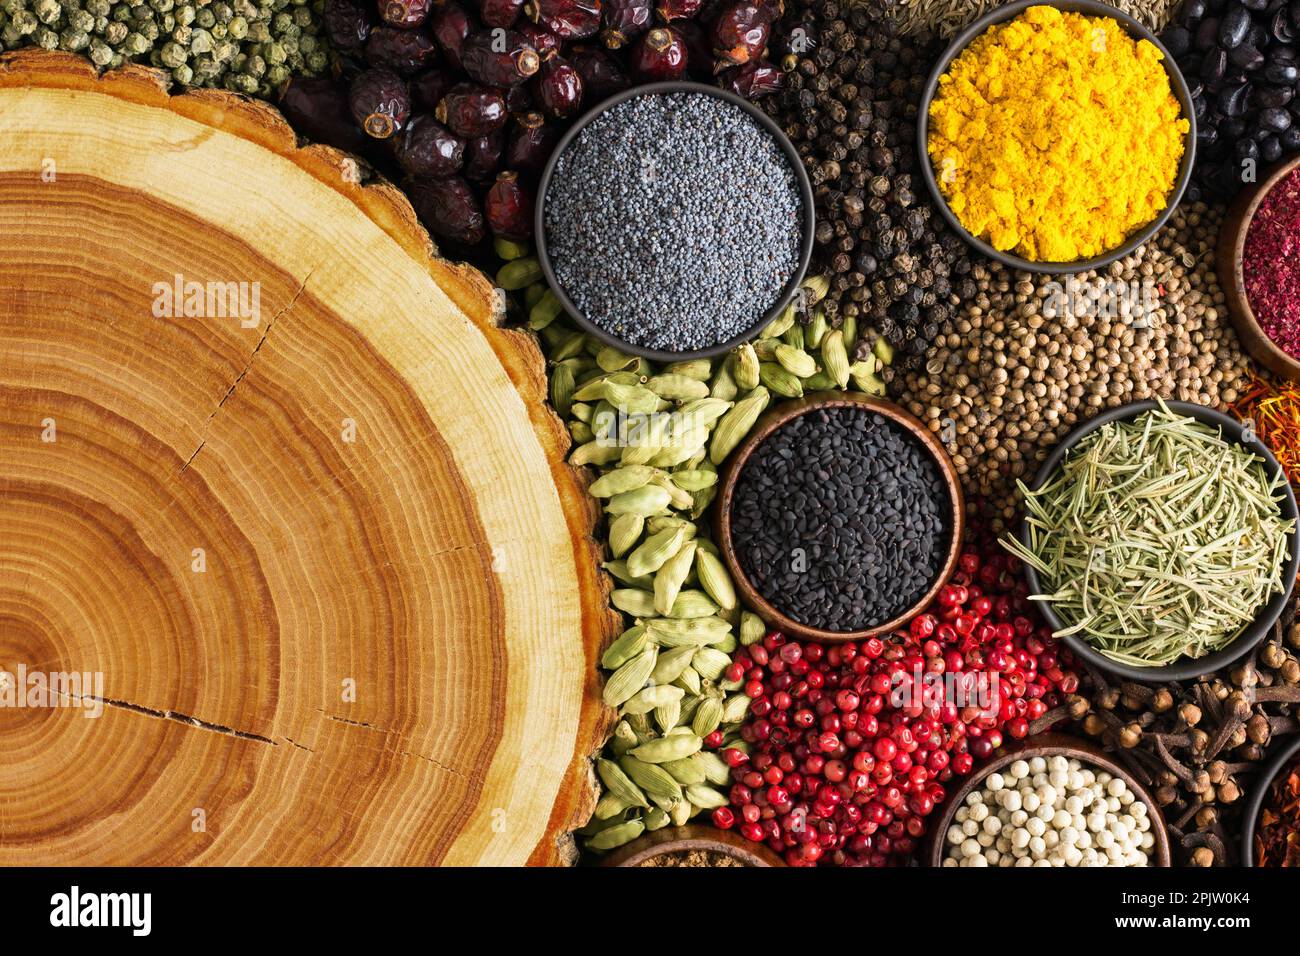 Condiments  scattered on table with empty space for text or label. Colorful spices and herbs background. Stock Photo